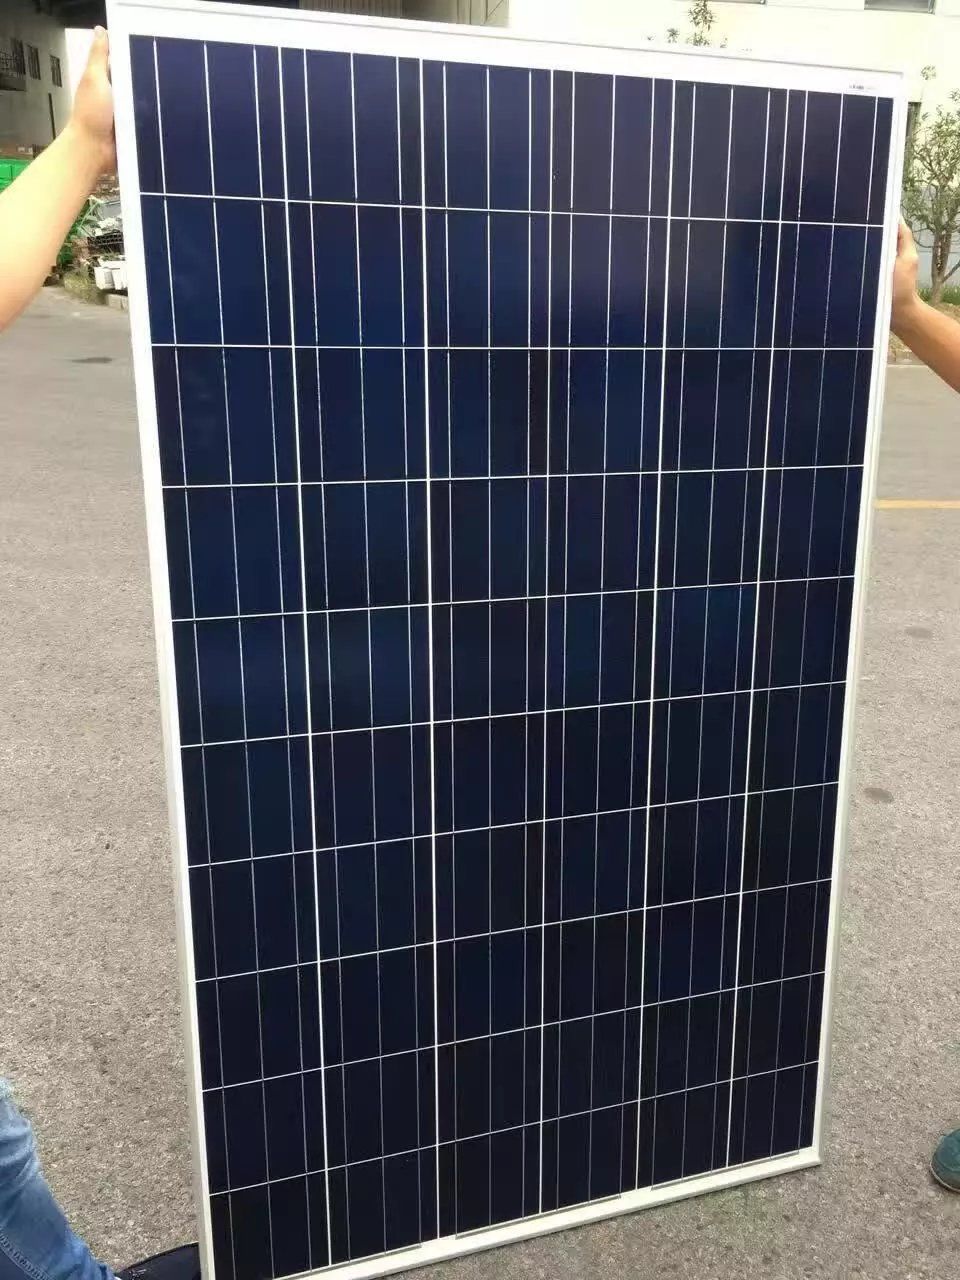 2021 250W Solar Panel|250W Poly Solar Panel|Solar Power For Home Used